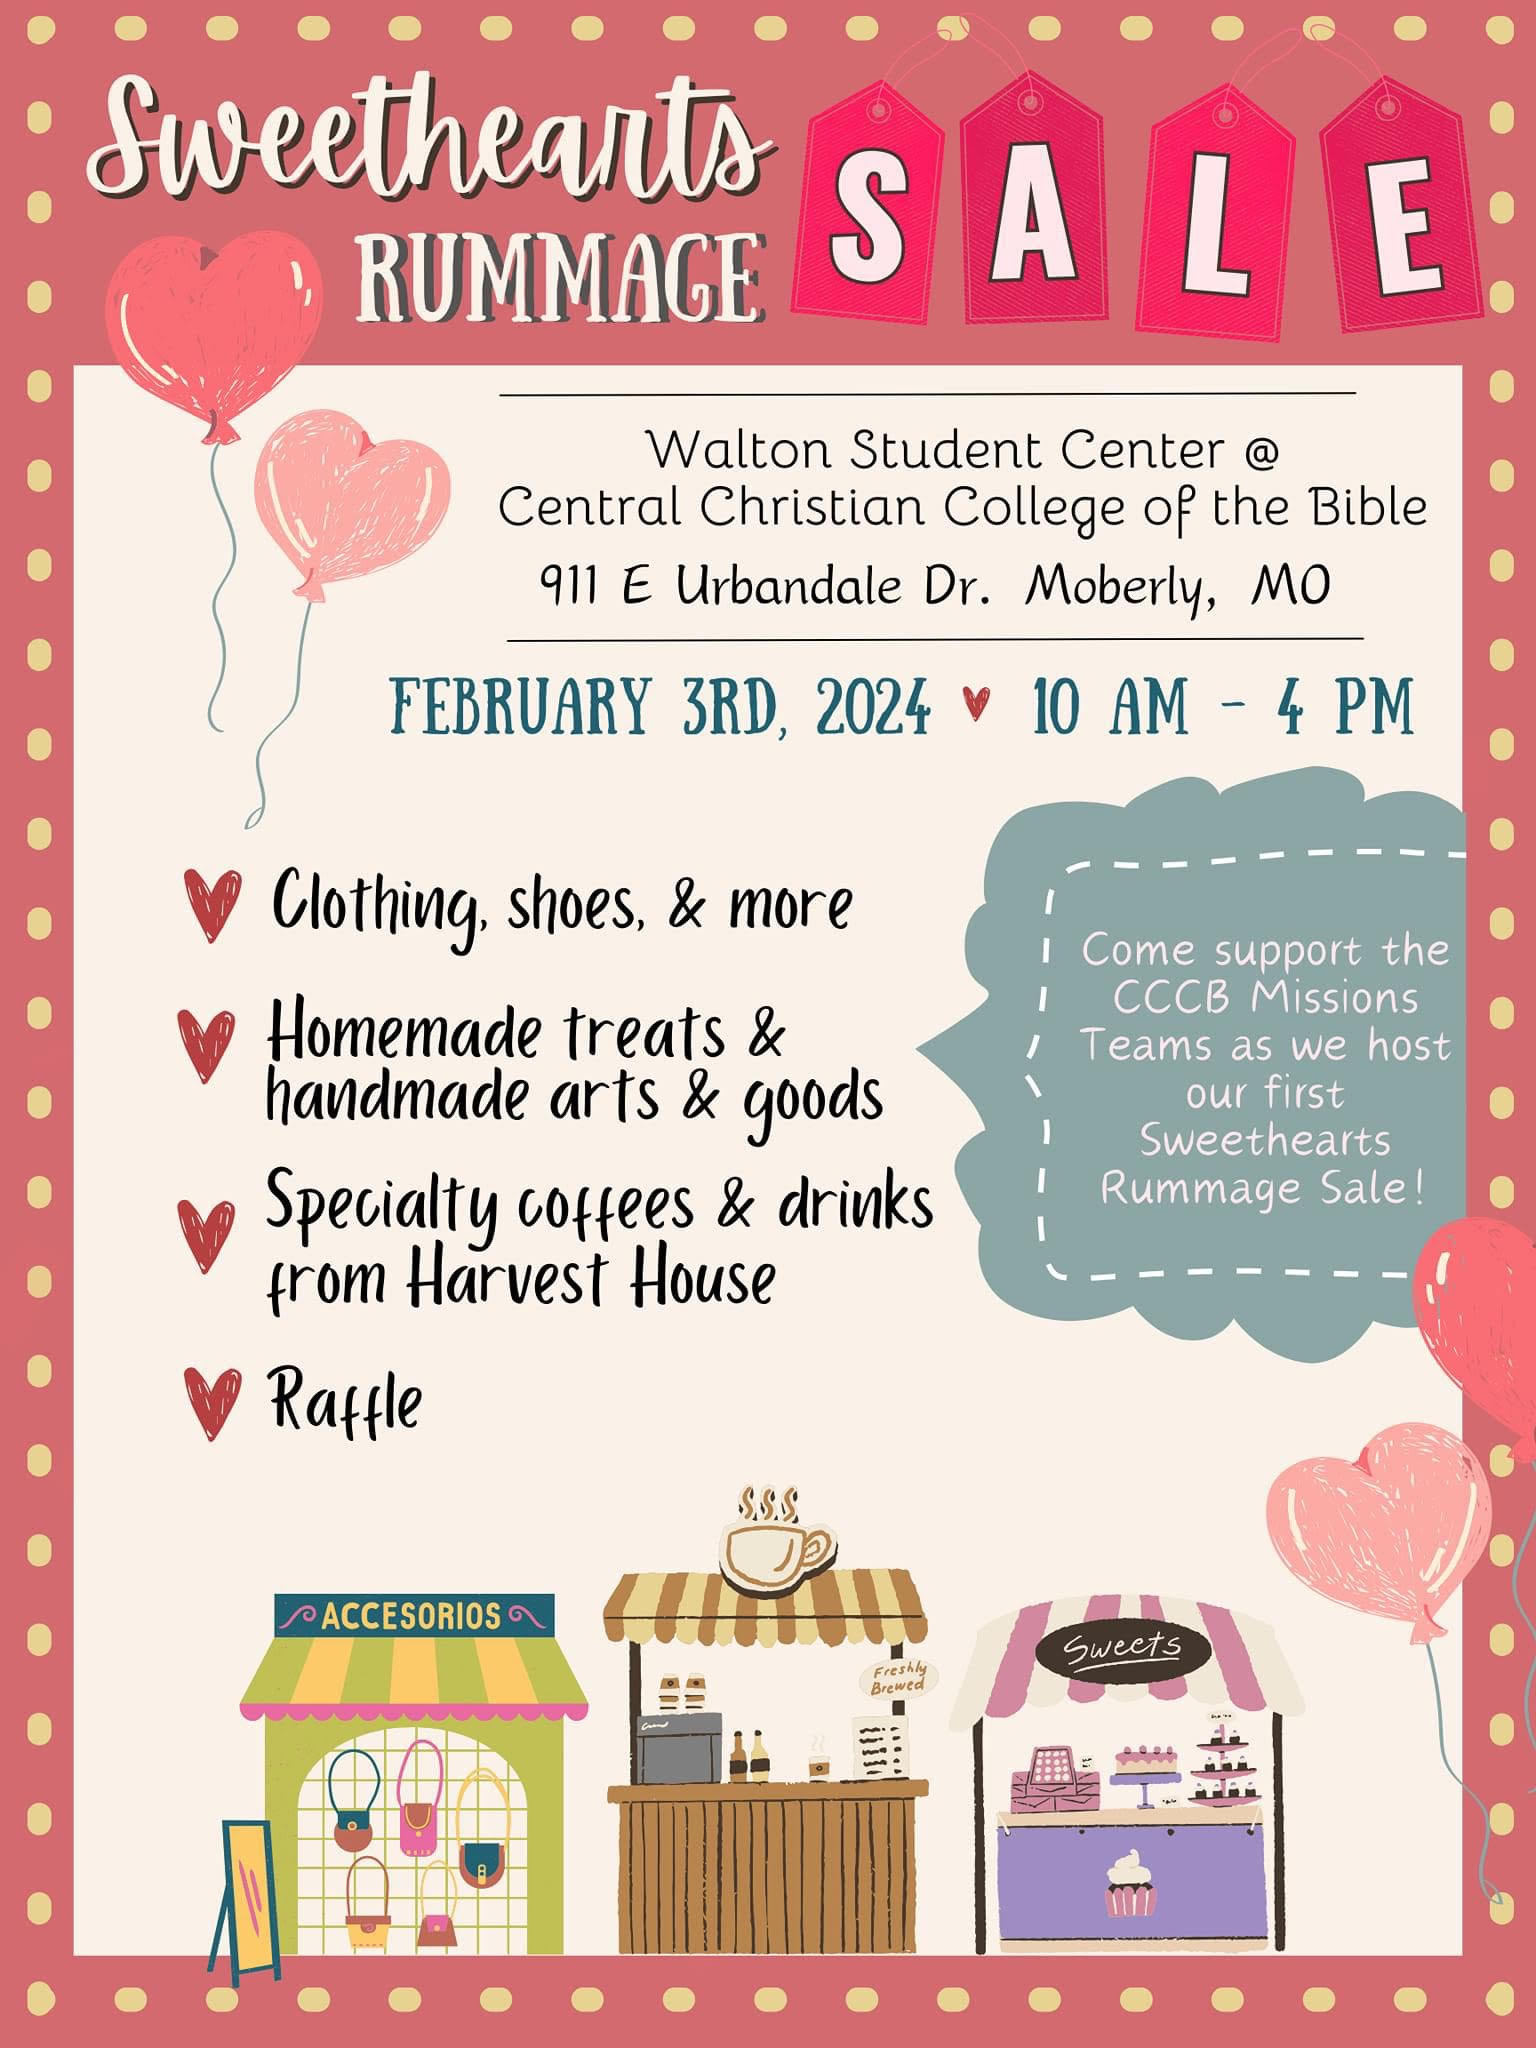 <h1 class="tribe-events-single-event-title">Sweethearts Rummage Sale</h1>